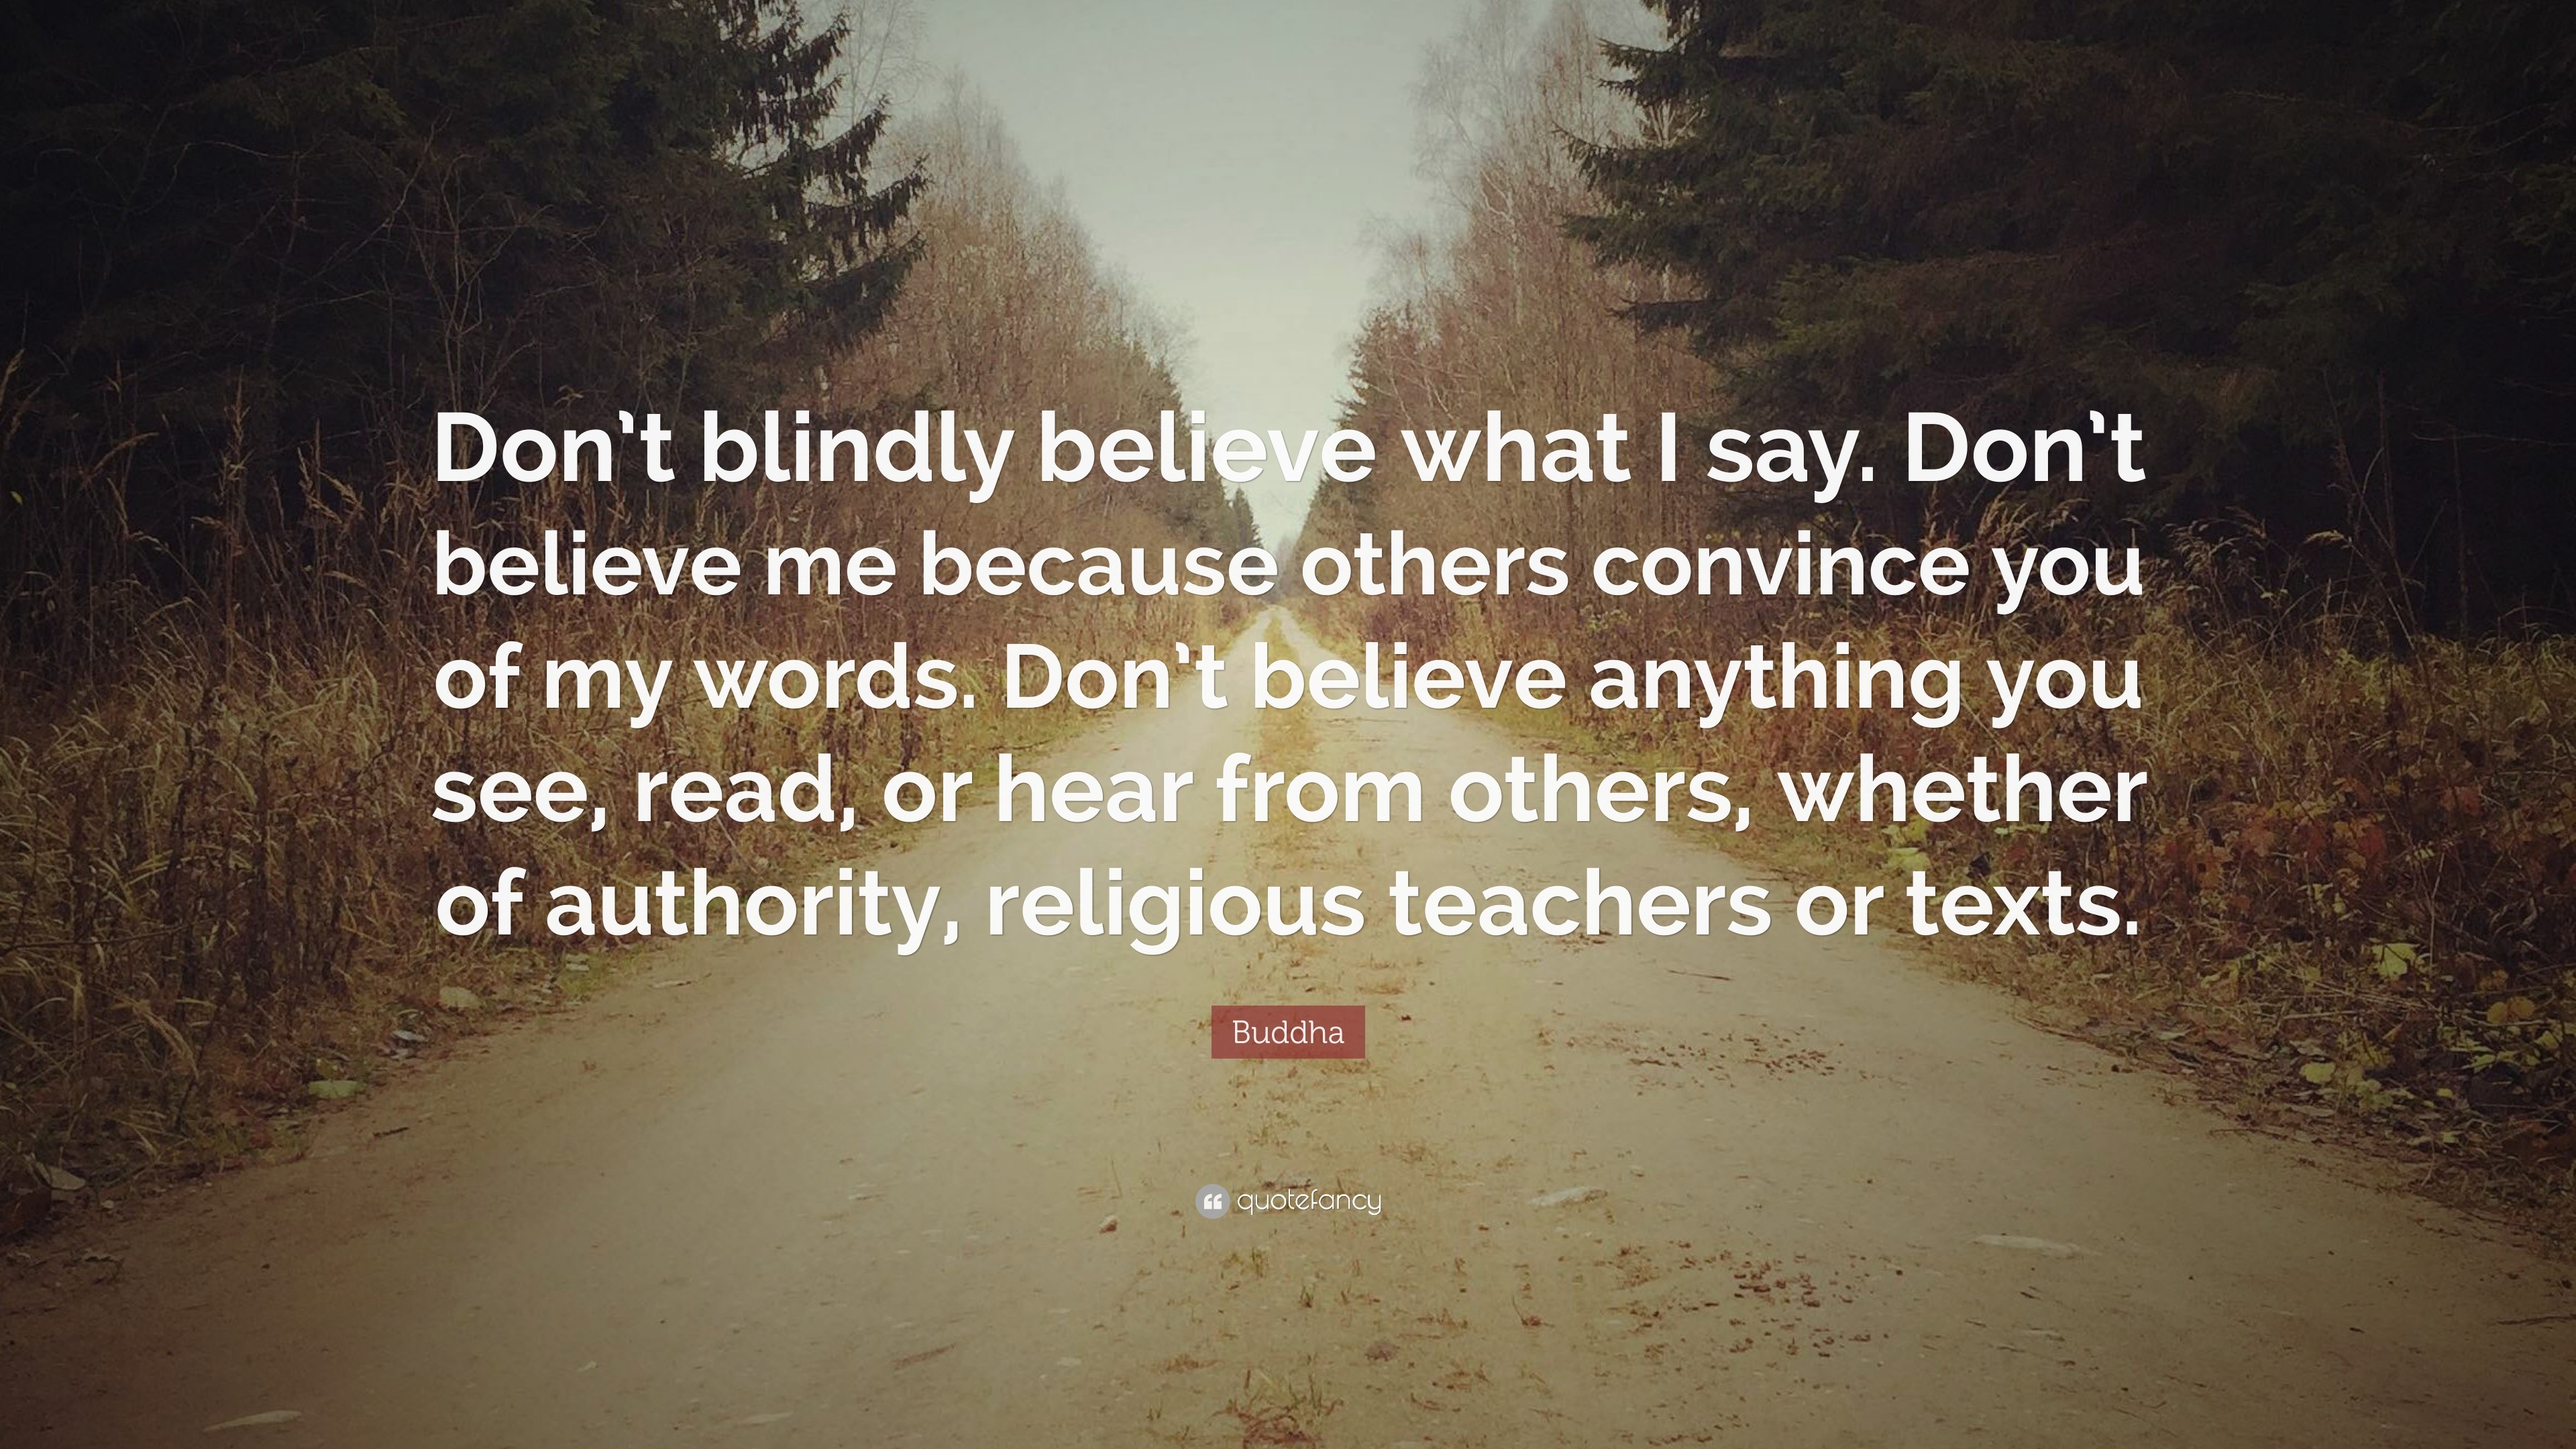 “Don’t blindly believe what I say. Don’t believe me because others convince you of my words. Don’t believe anything you see, read, or hear from others, whether of authority, religious teachers or texts.”